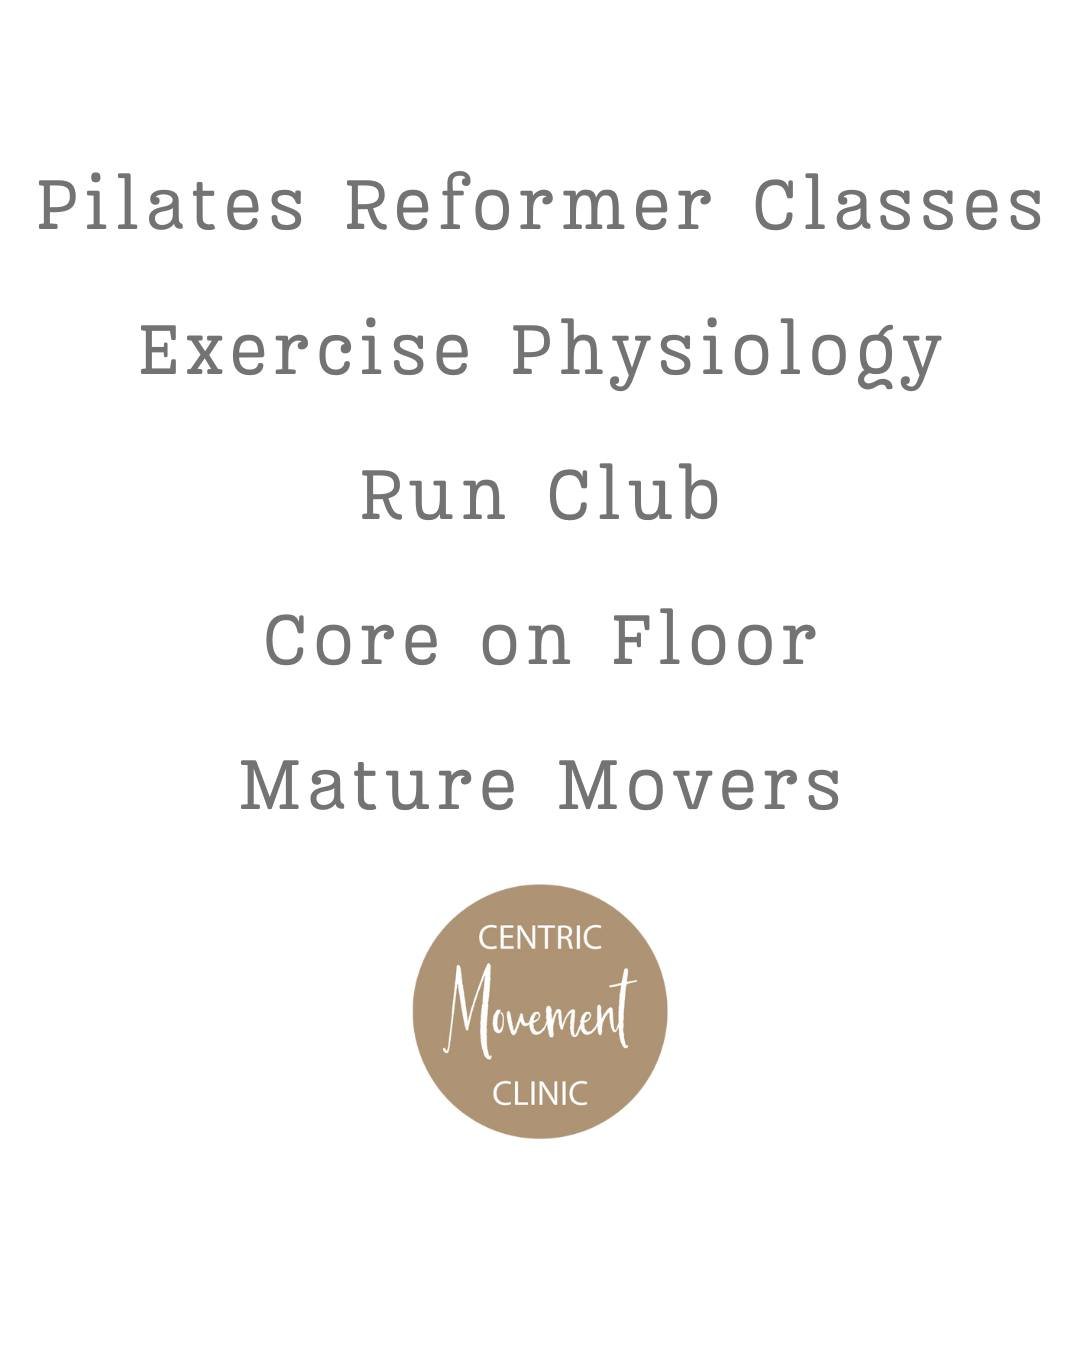 Centric Movement Clinic offers 5 different movement services. The team of Exercise Physiologist, Pilates Instructors and Run Coaches, have years of experience and the best at what they do.

'Change happens through movement and movement heals' - Josep